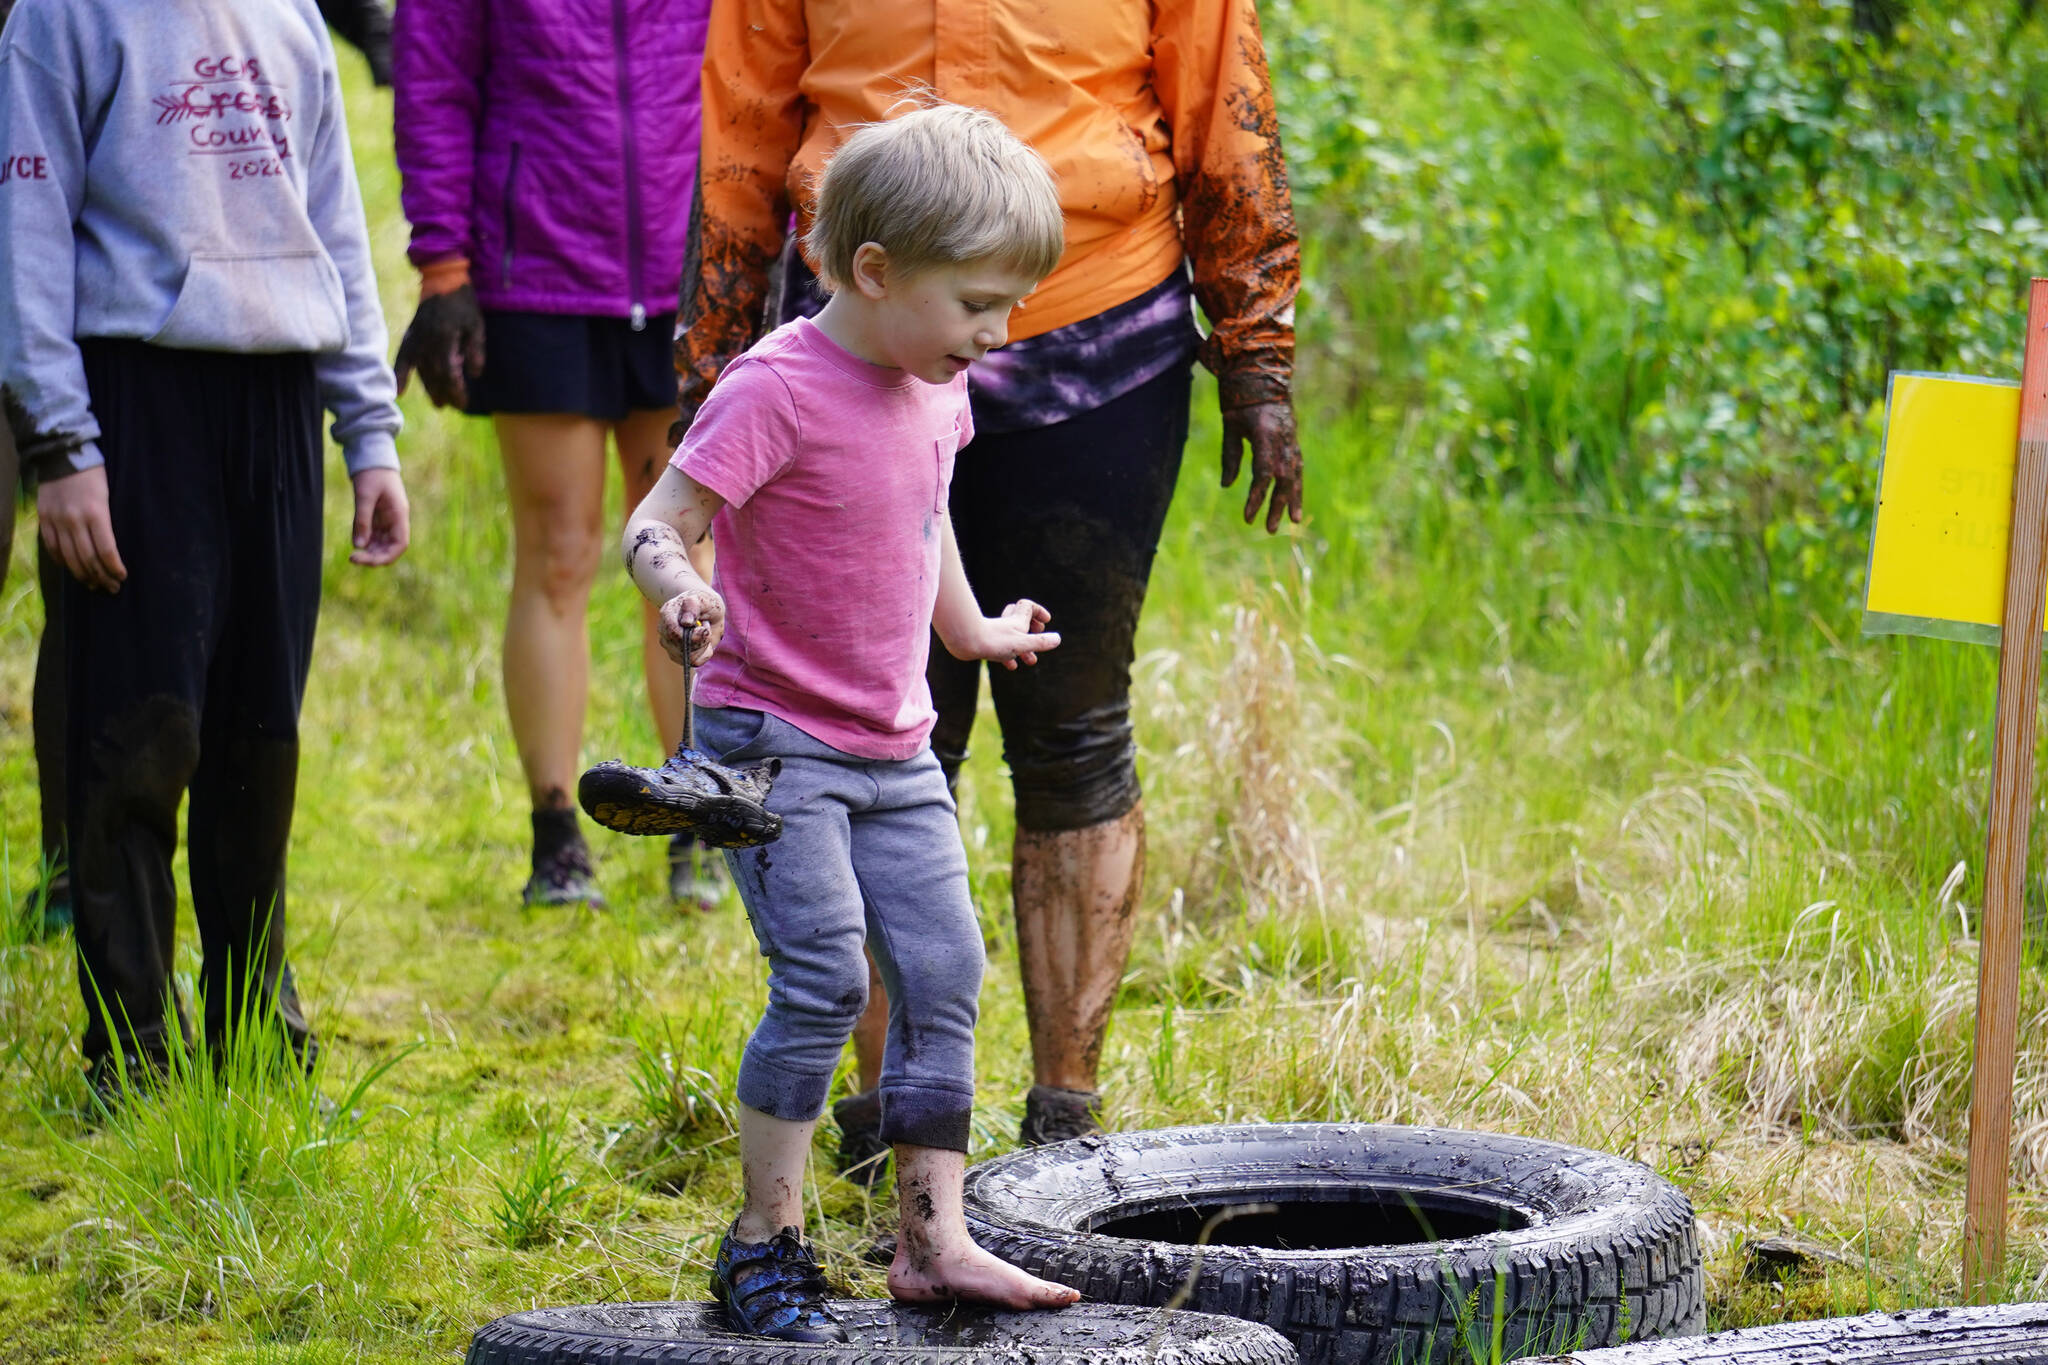 A young contestant balances carefully to avoid falling into the mud during the KDLL Mud Run at Tsalteshi Trails in Soldotna, Alaska, on Friday, June 16, 2023. (Jake Dye/Peninsula Clarion)